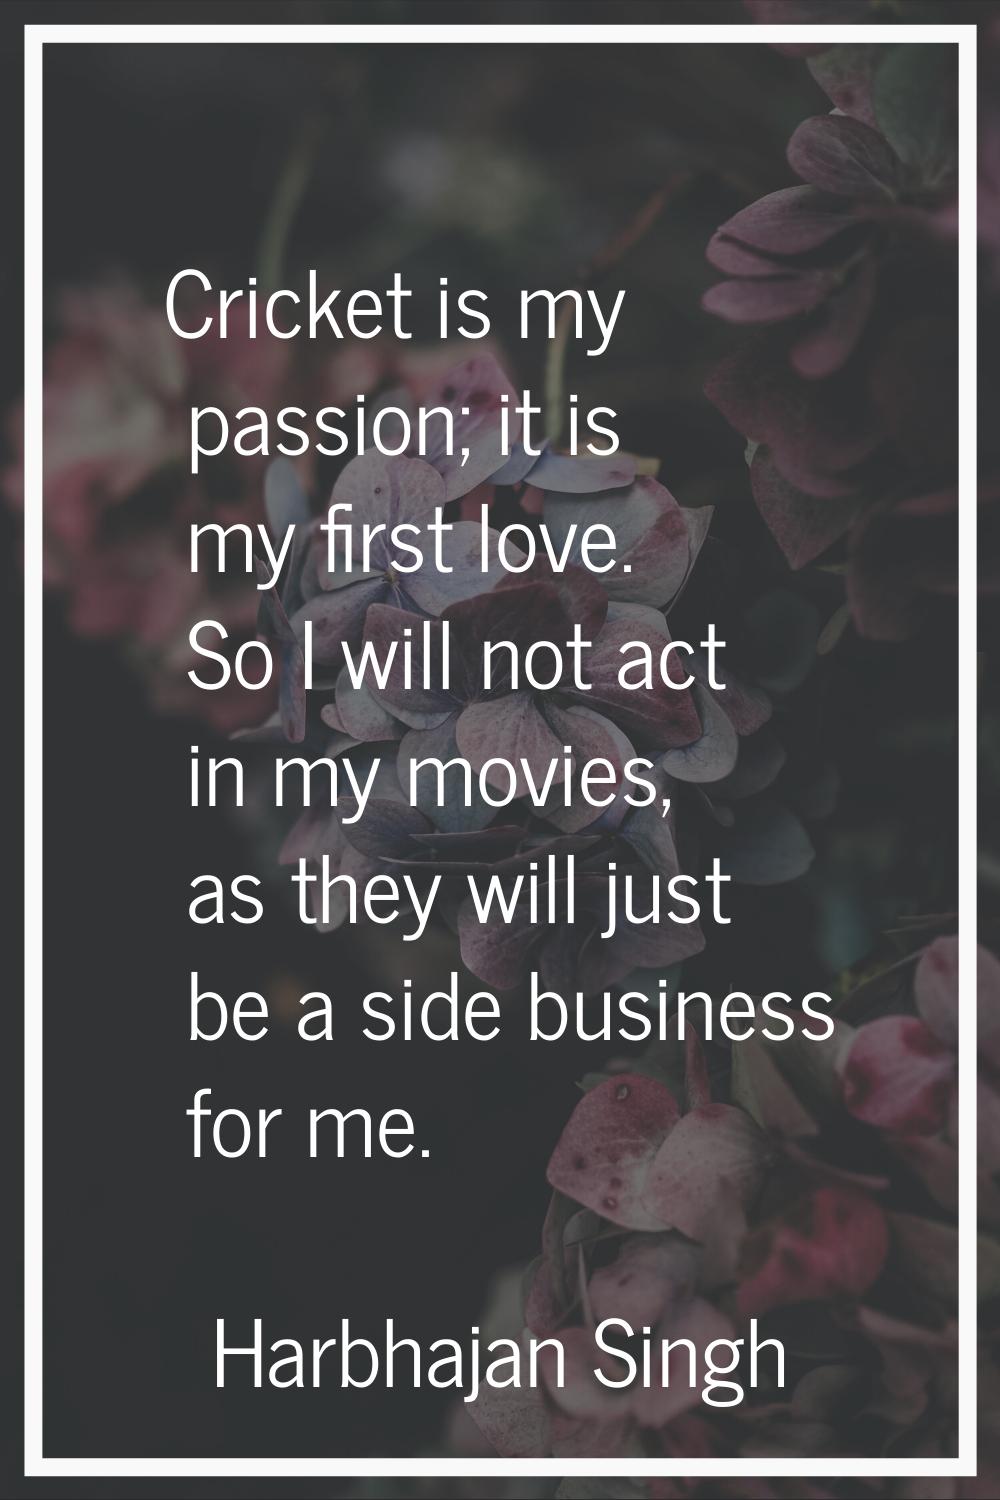 Cricket is my passion; it is my first love. So I will not act in my movies, as they will just be a 